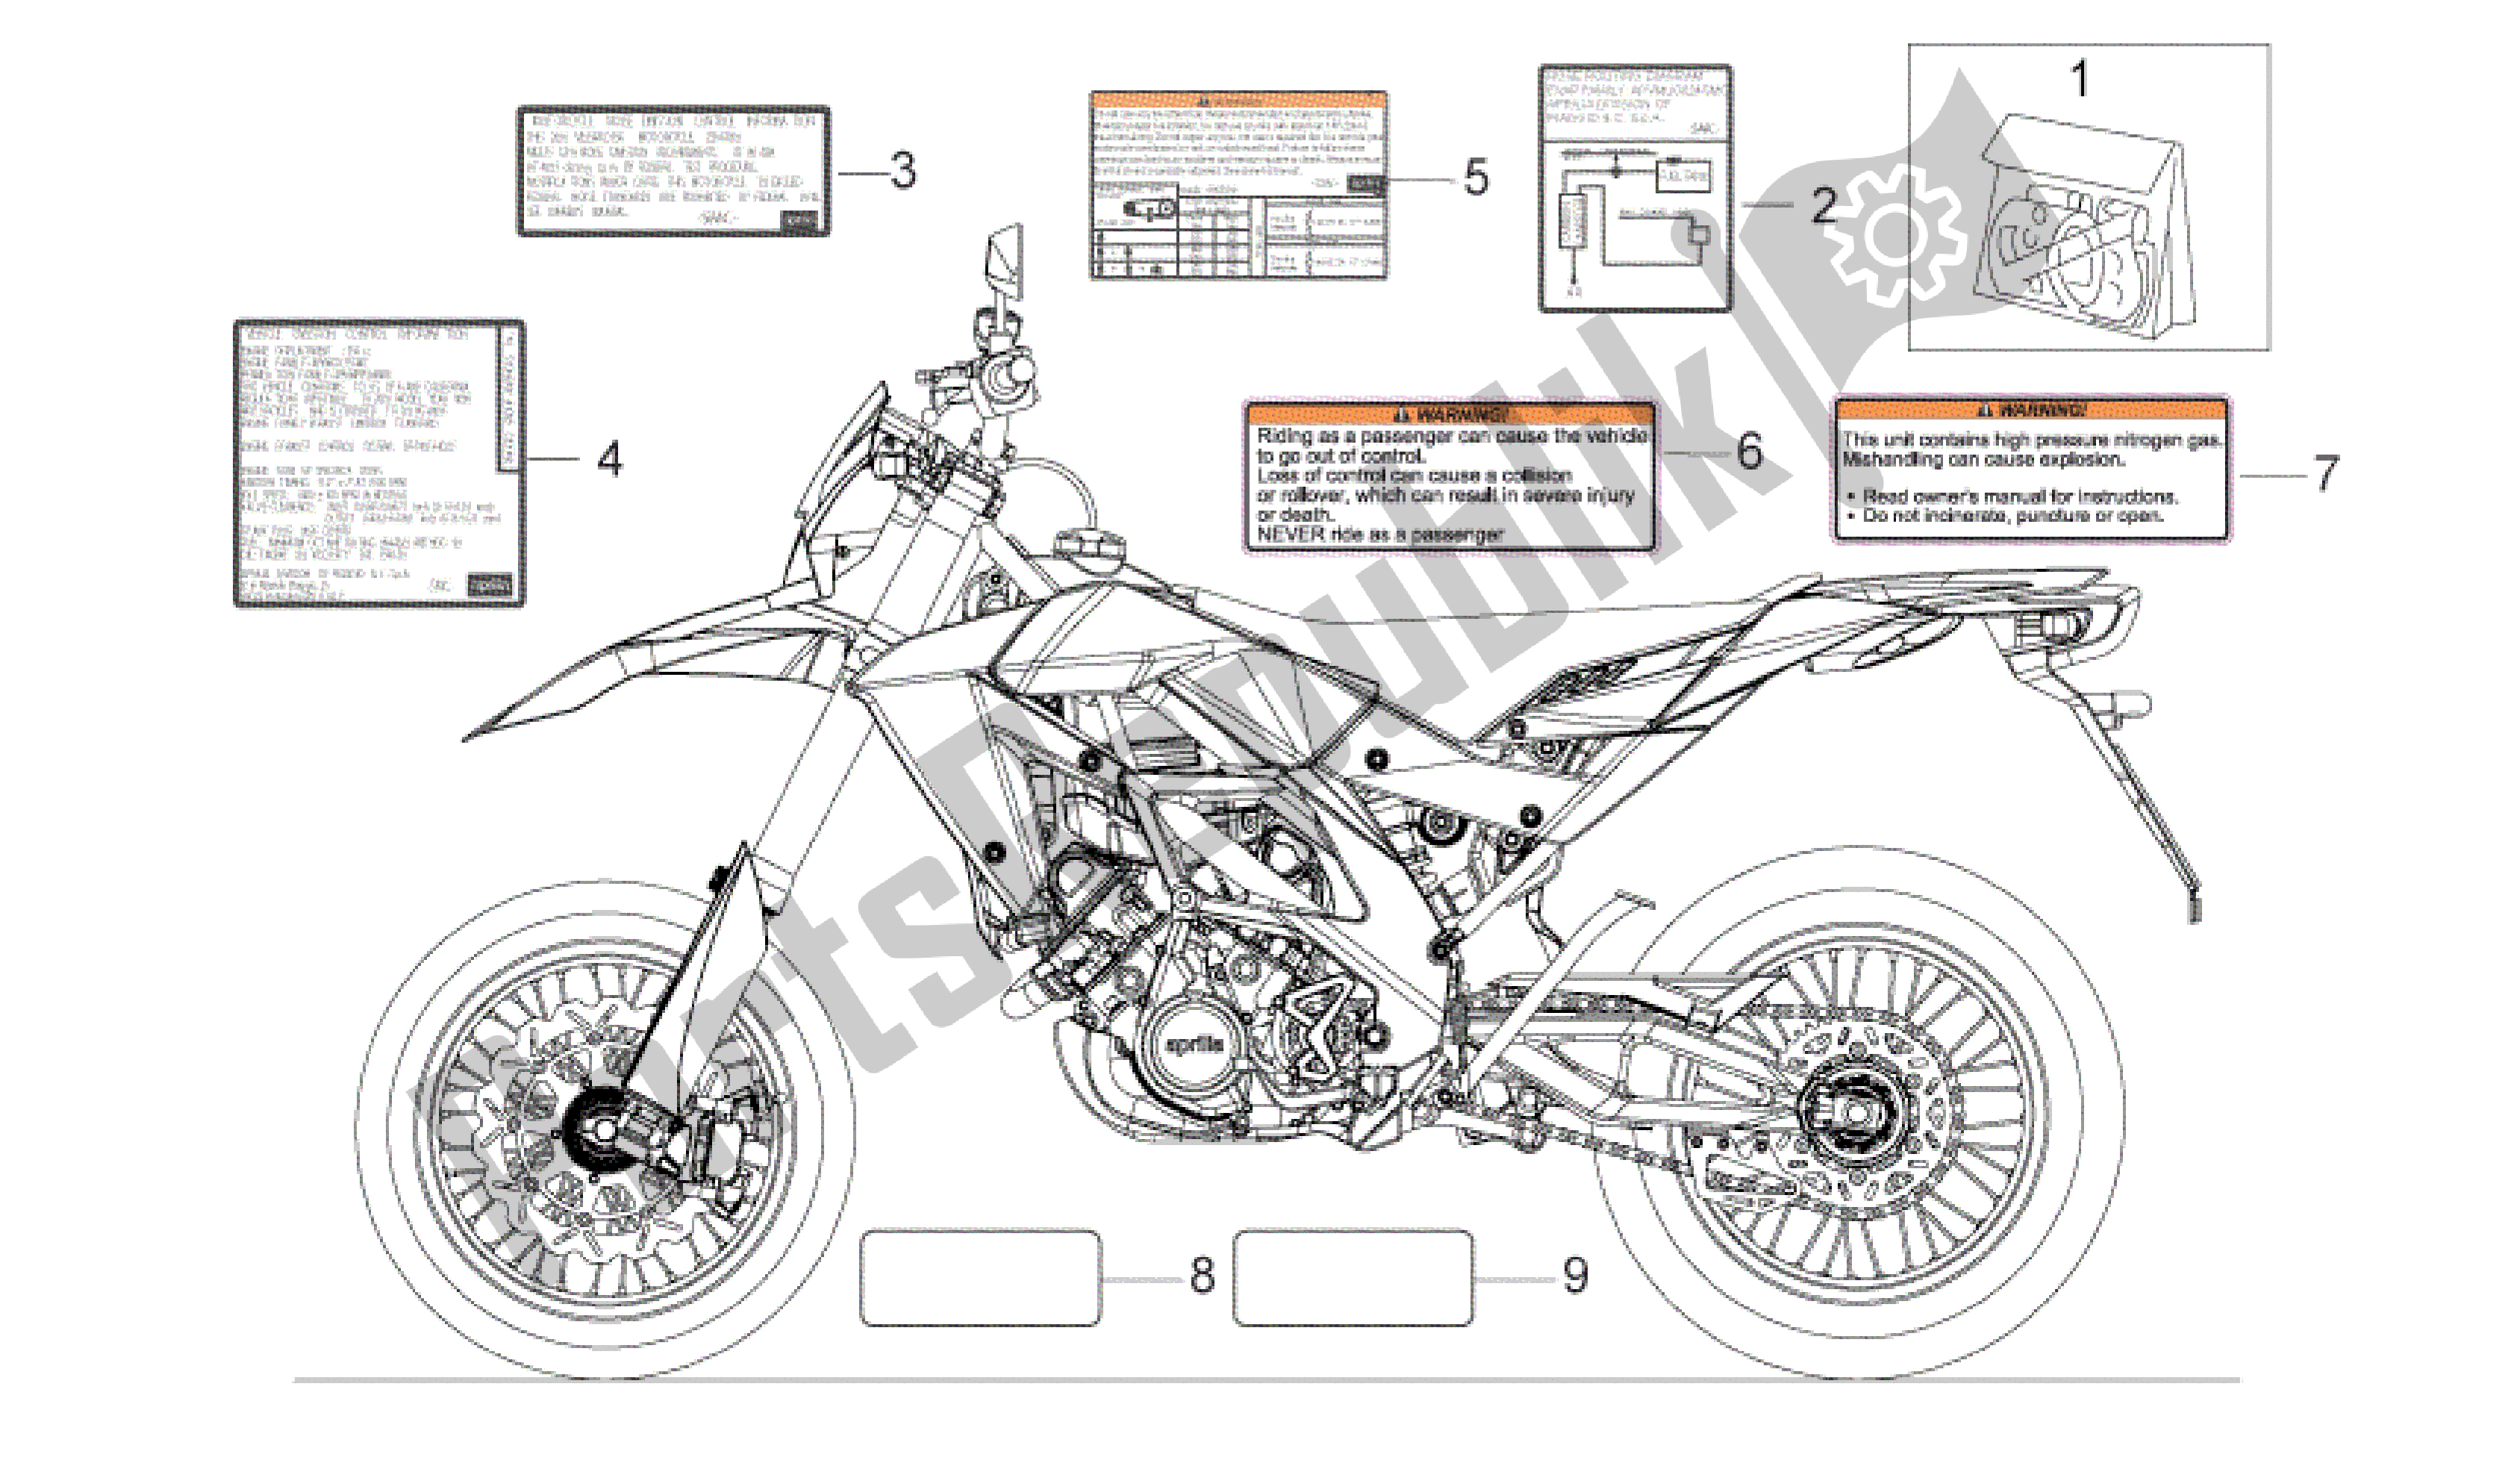 All parts for the Decal of the Aprilia RXV 550 2009 - 2011